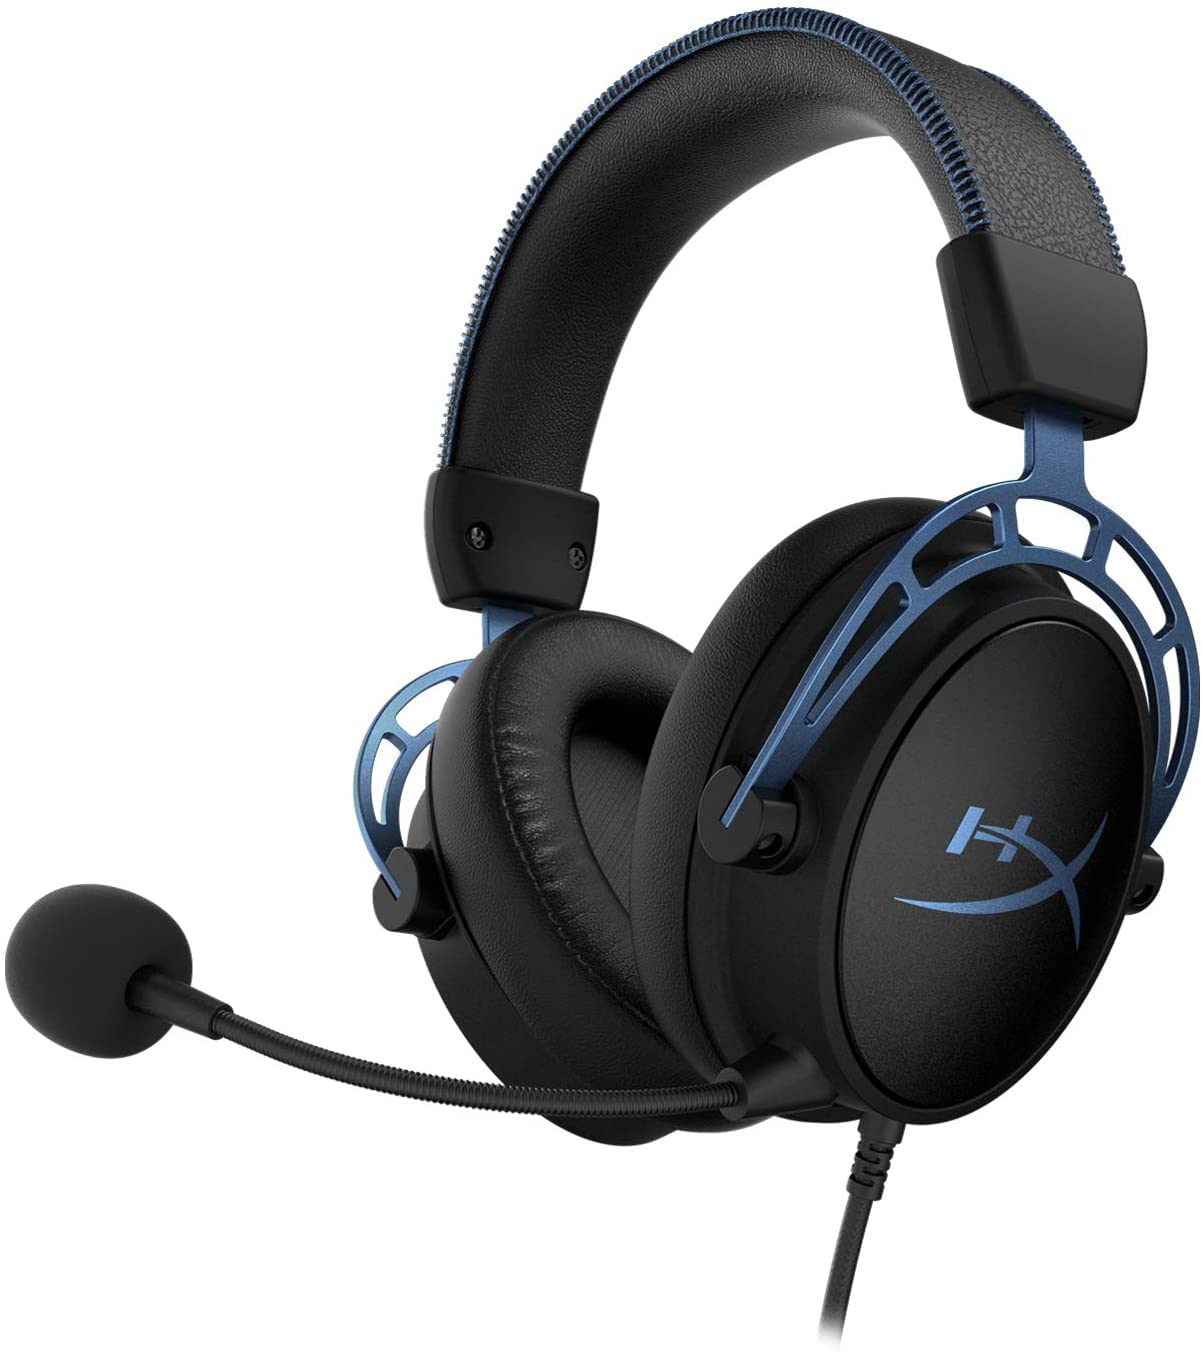 HyperX Cloud Alpha S 7.1 Surround Sound Gaming Headset (Blue) $65 + Free Shipping